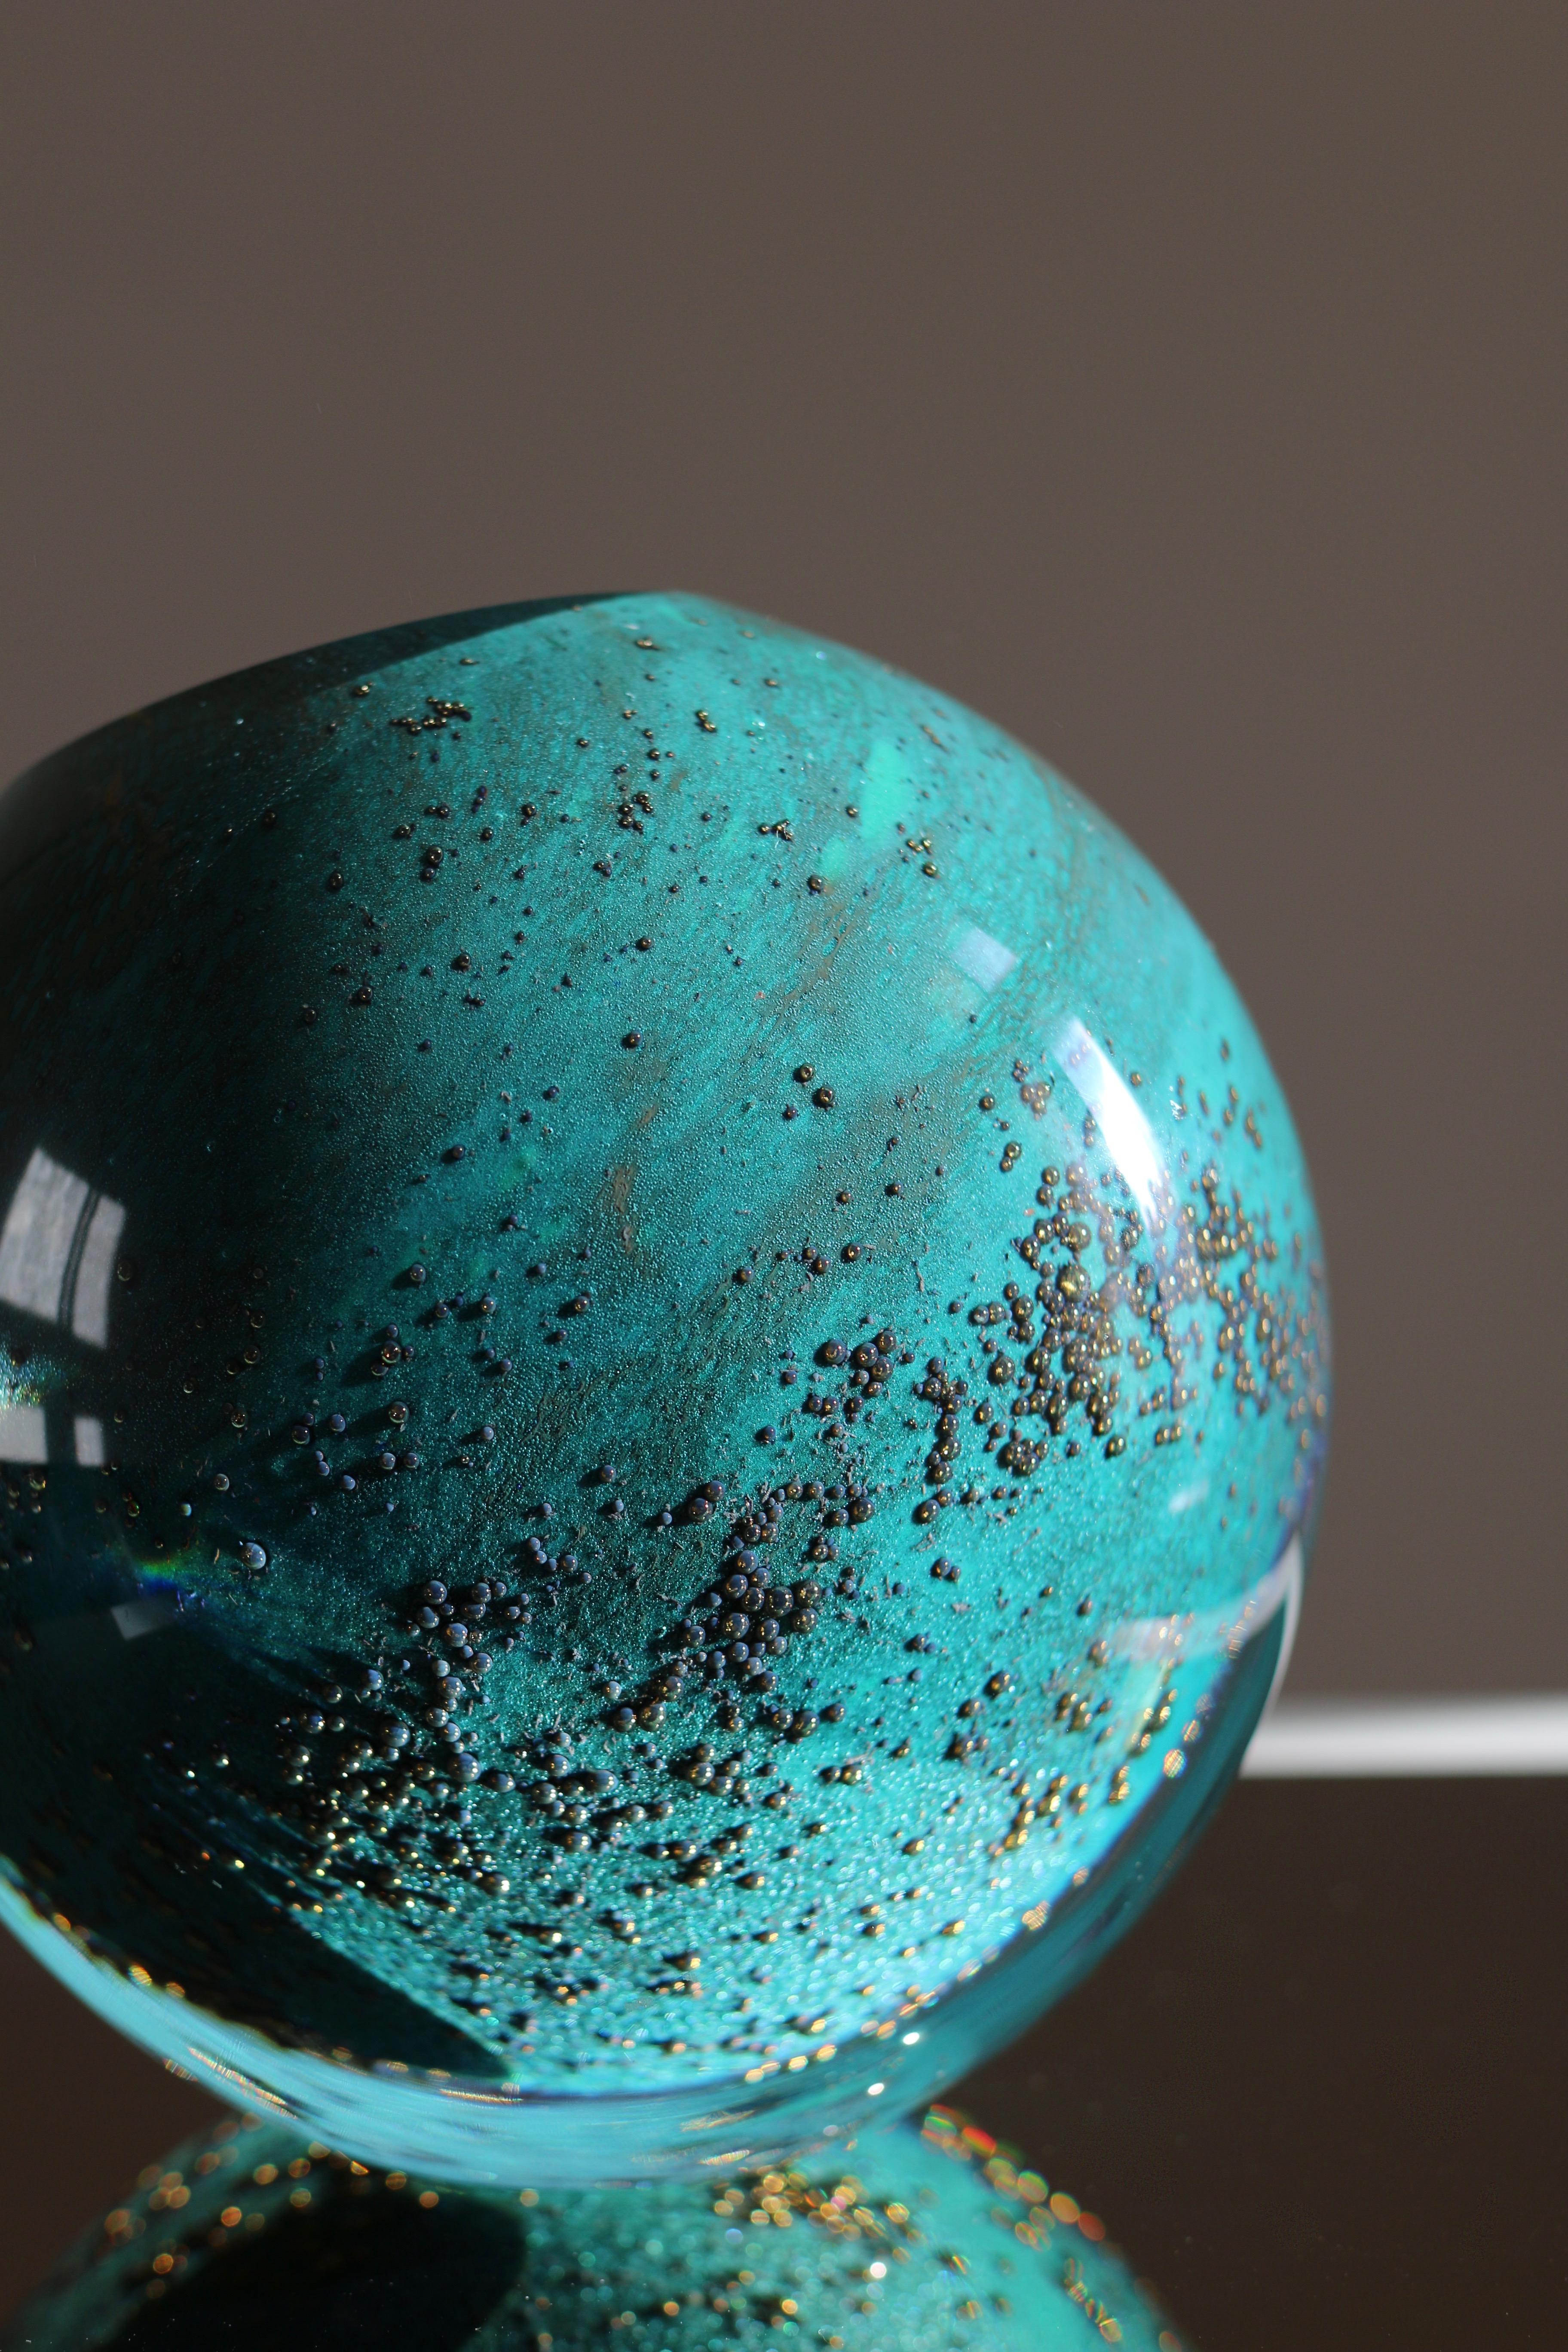 Freeform mouth-blown glass vase in intense emerald greed, canary and gold tone inclusion clusters.
Extra-clear top quality and lustrous glass.
This contemporary small scale sculpture is a unique piece from collection Experimental. 
Handmade by a